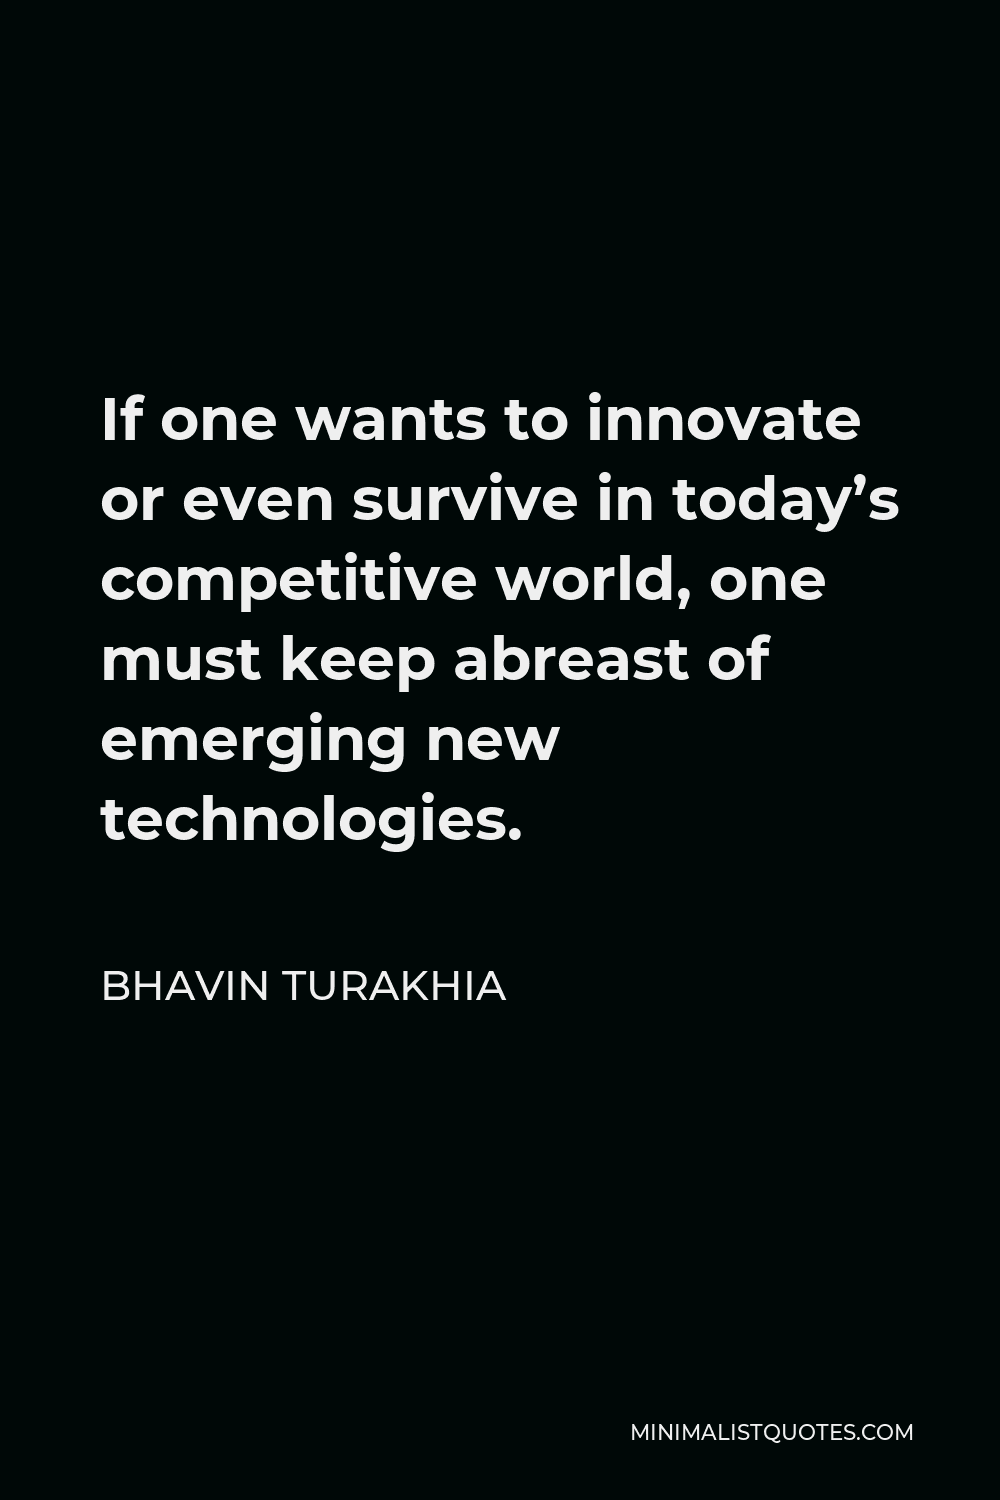 Bhavin Turakhia Quote - If one wants to innovate or even survive in today’s competitive world, one must keep abreast of emerging new technologies.